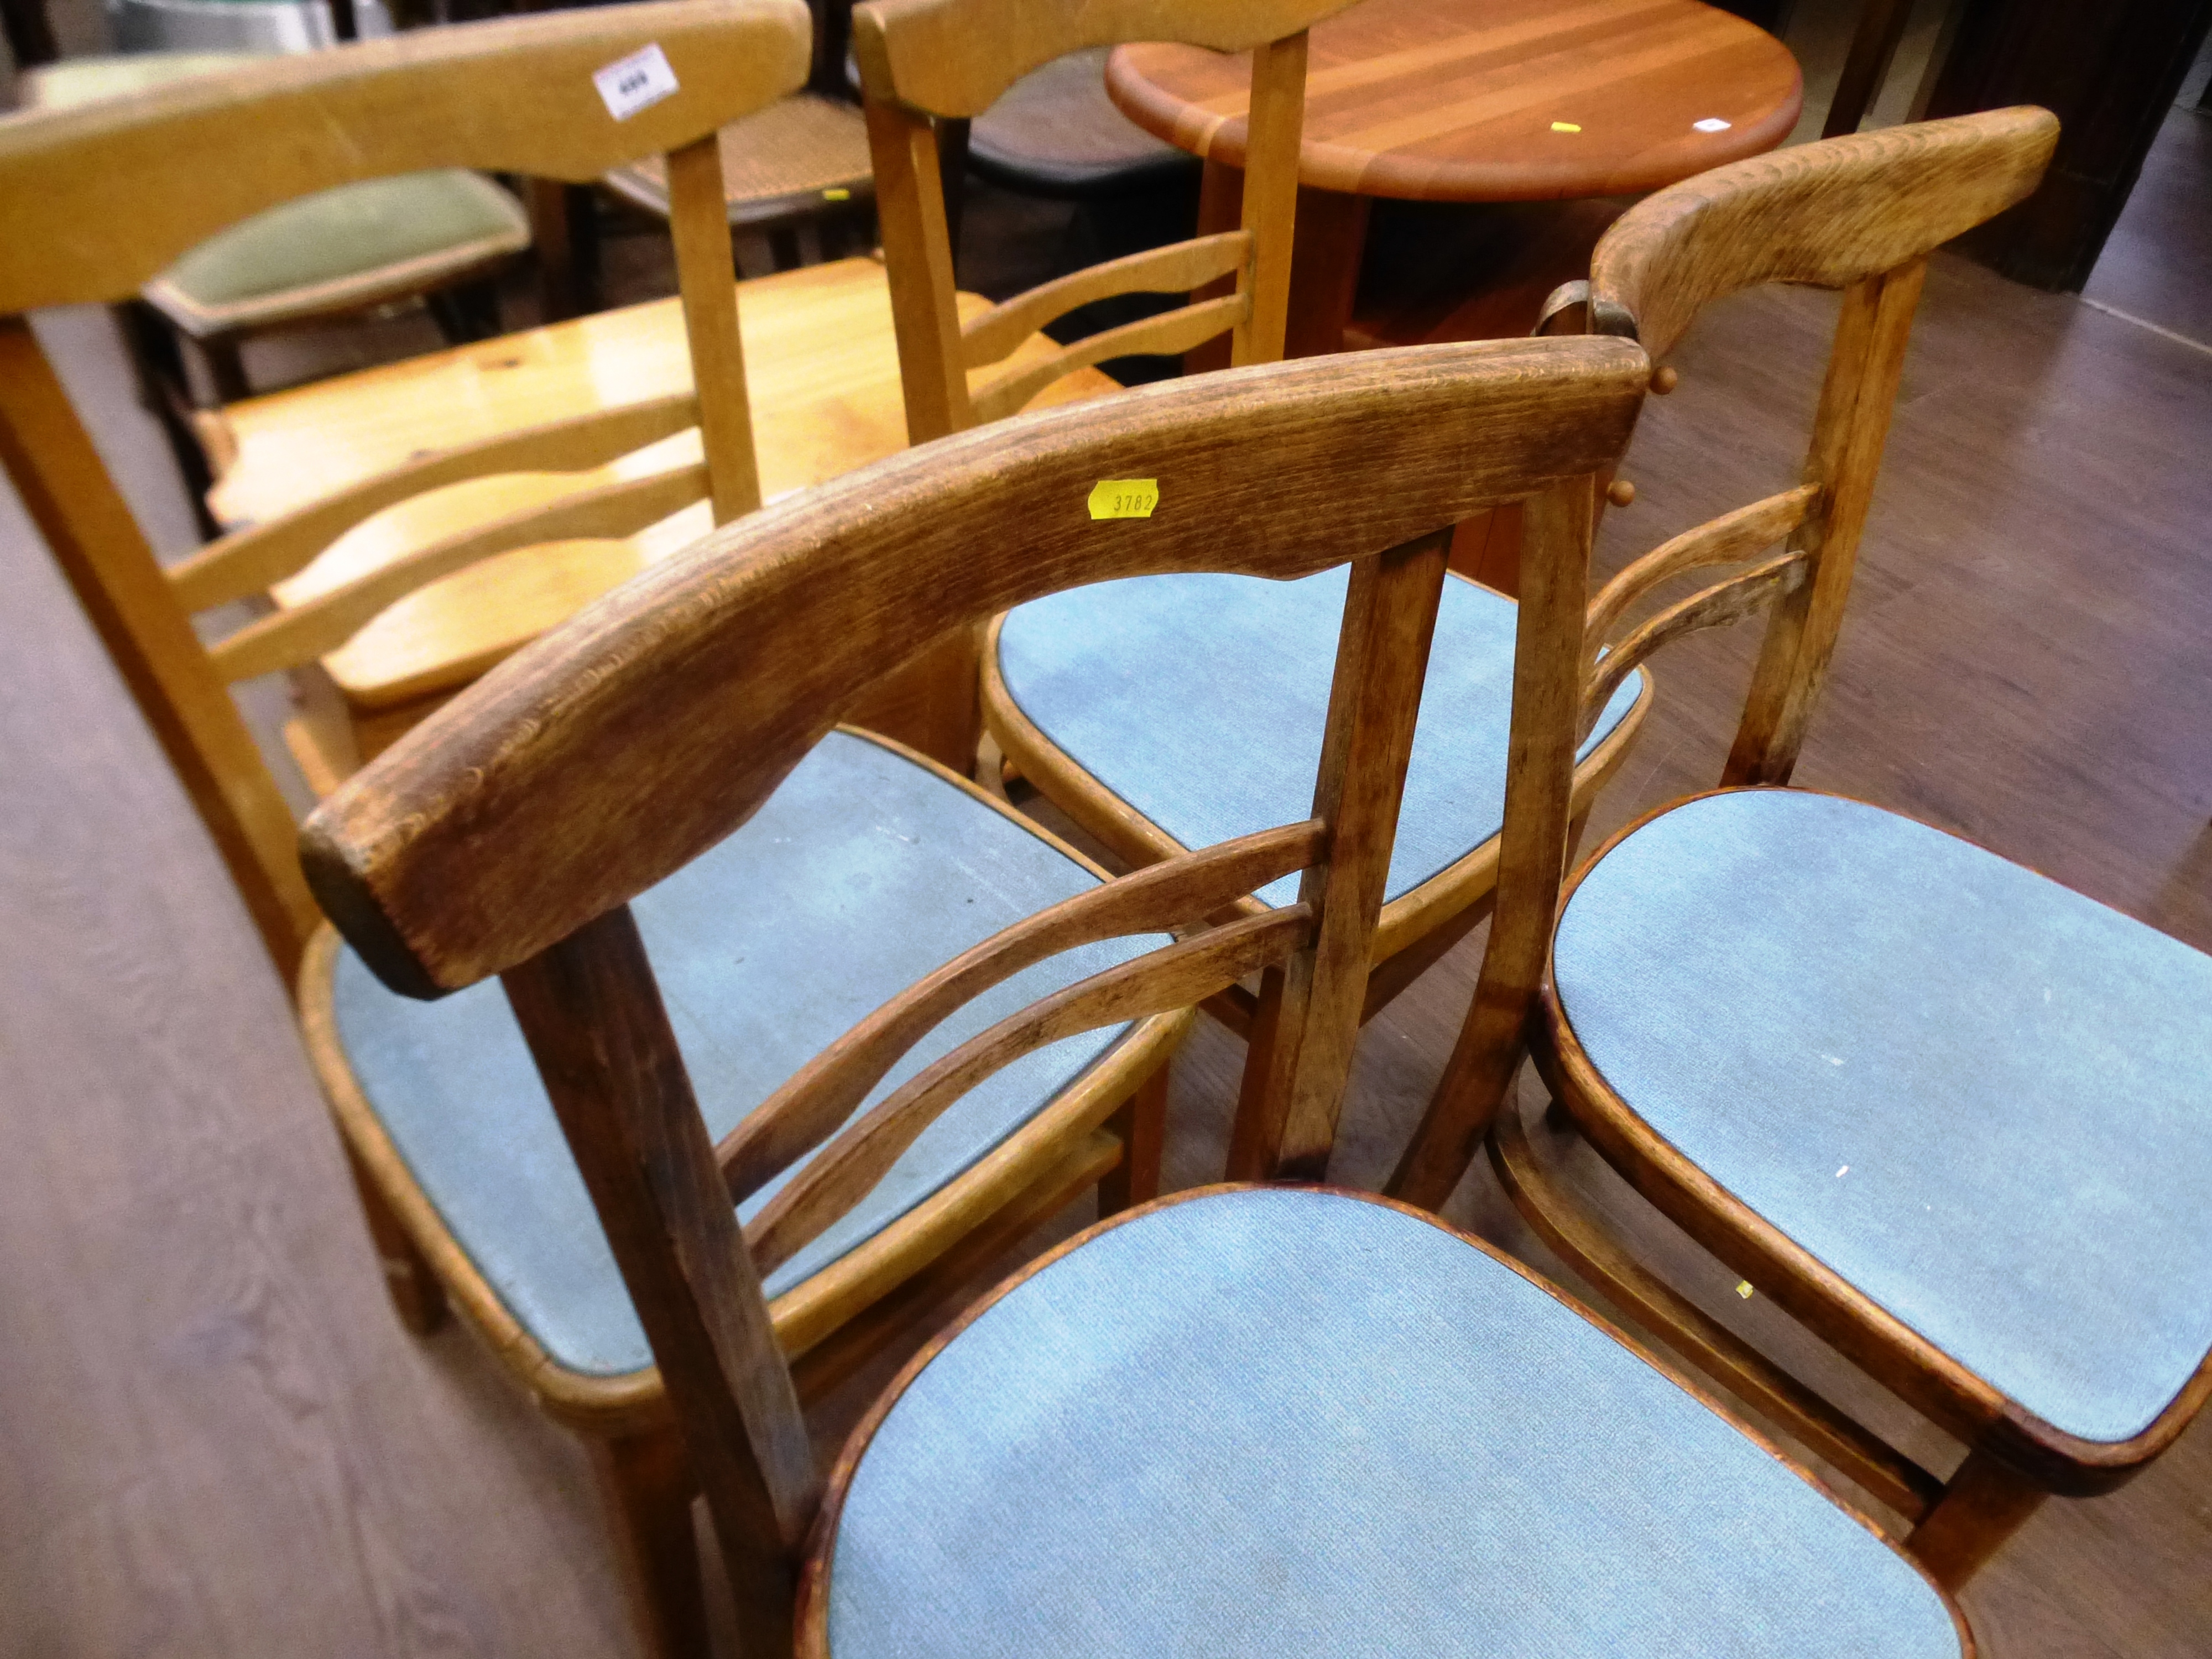 SET OF 4 PINE CHAIRS - Image 4 of 5